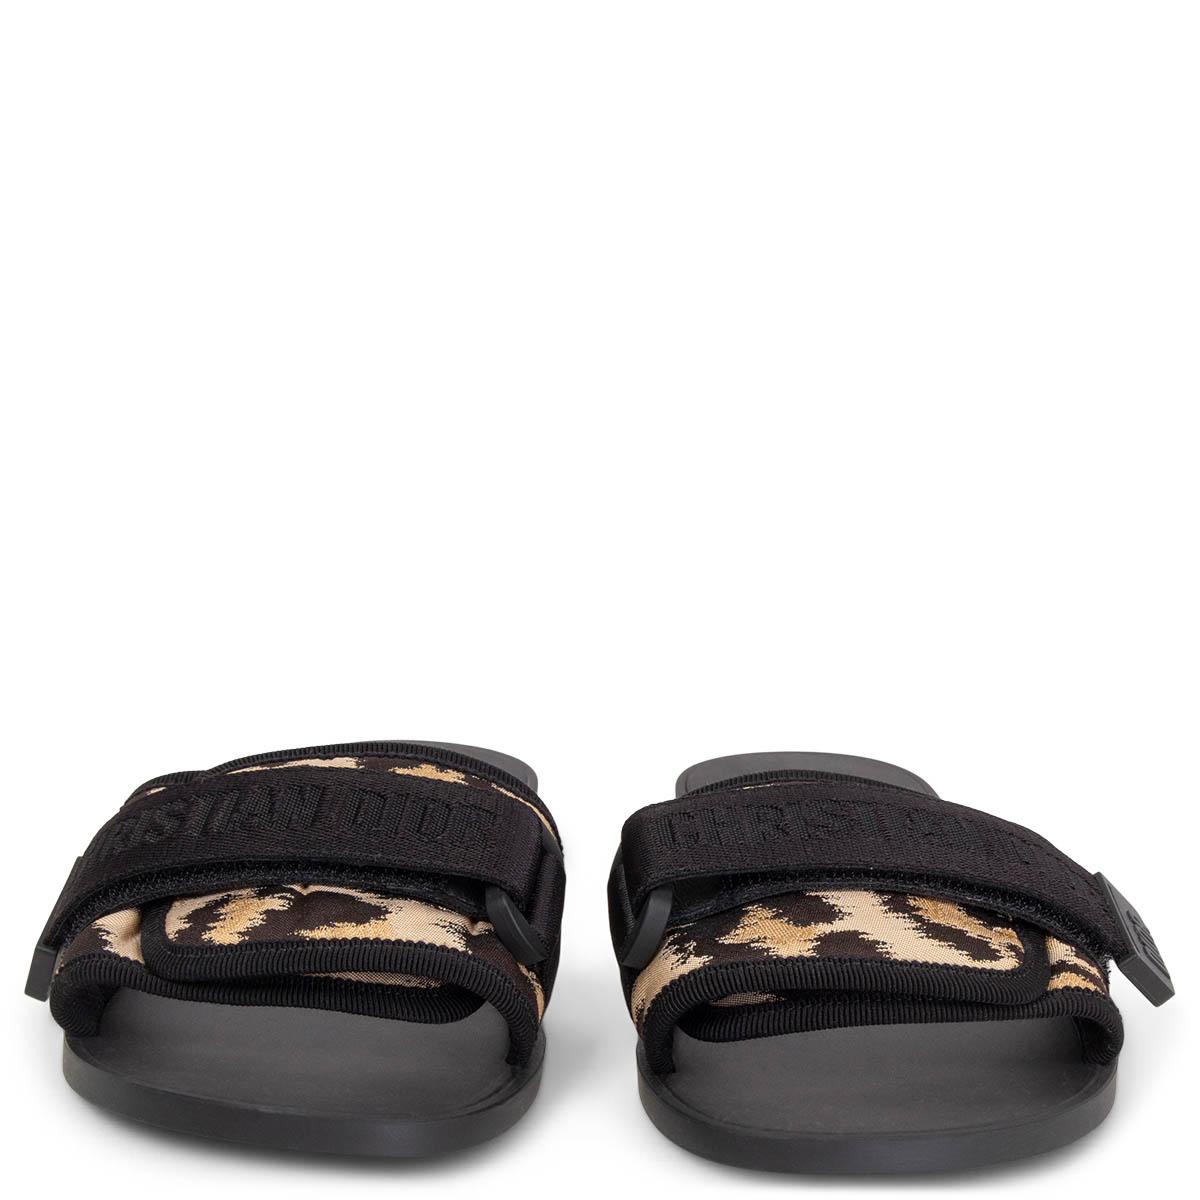 100% authentic Christian Dior Dio(r)evolution slide in black and beige jacquard leopard technical fabric with a adjustable nylon strap that features 'CHRISTIAN DIOR' signature. Black rubber sole. Brand new. Come with dust bag.